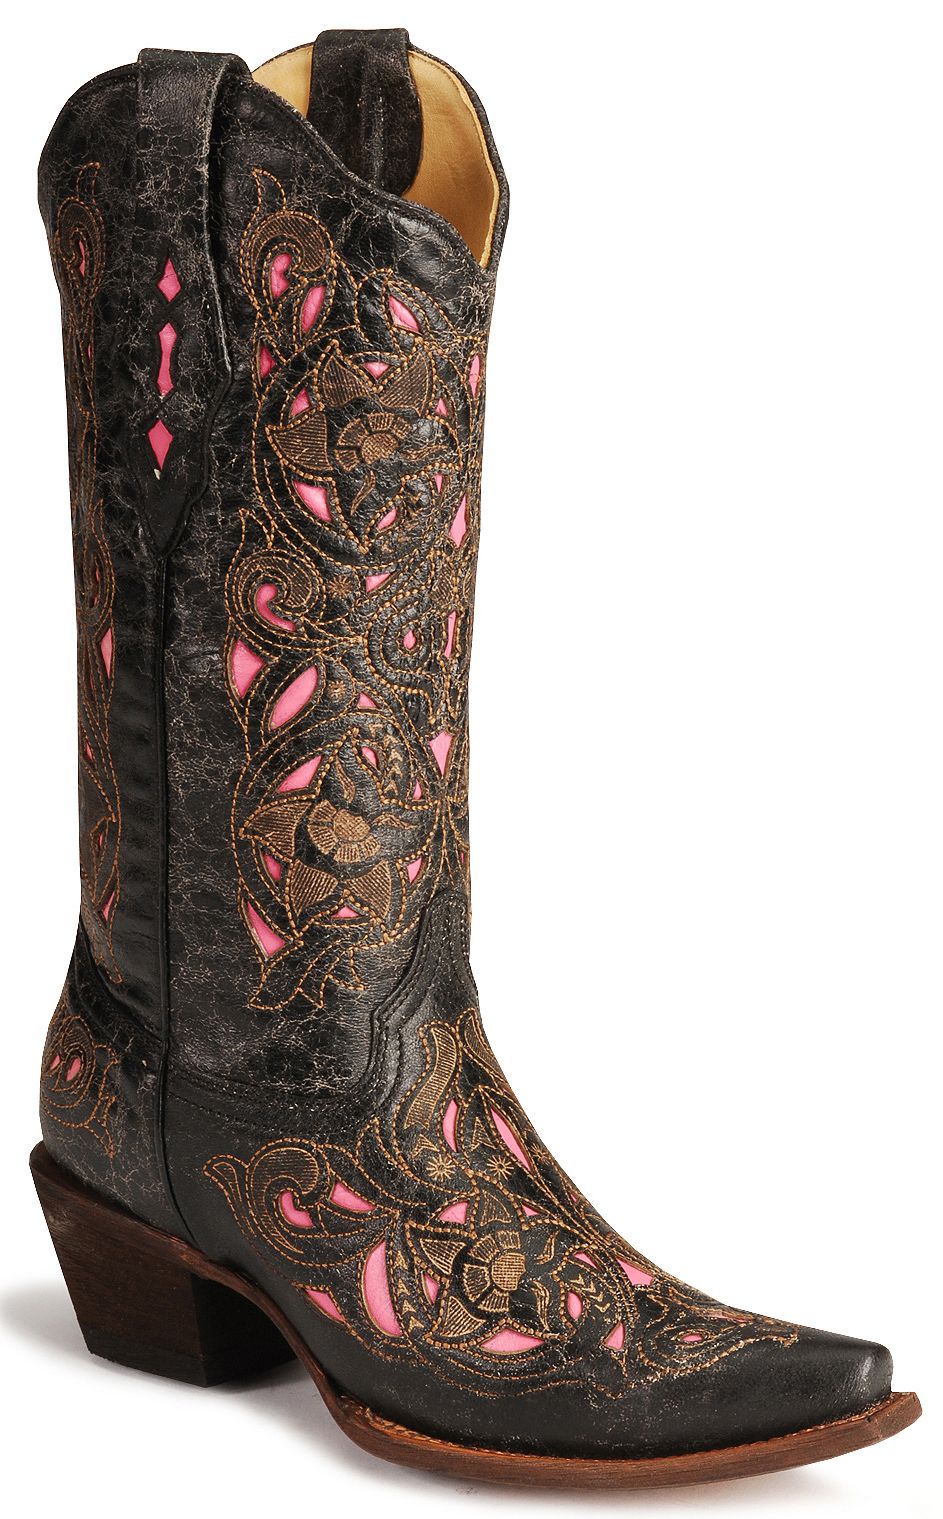 Corral Women's Laser Pink Inlay Cowboy Boots - Snip Toe | Sheplers